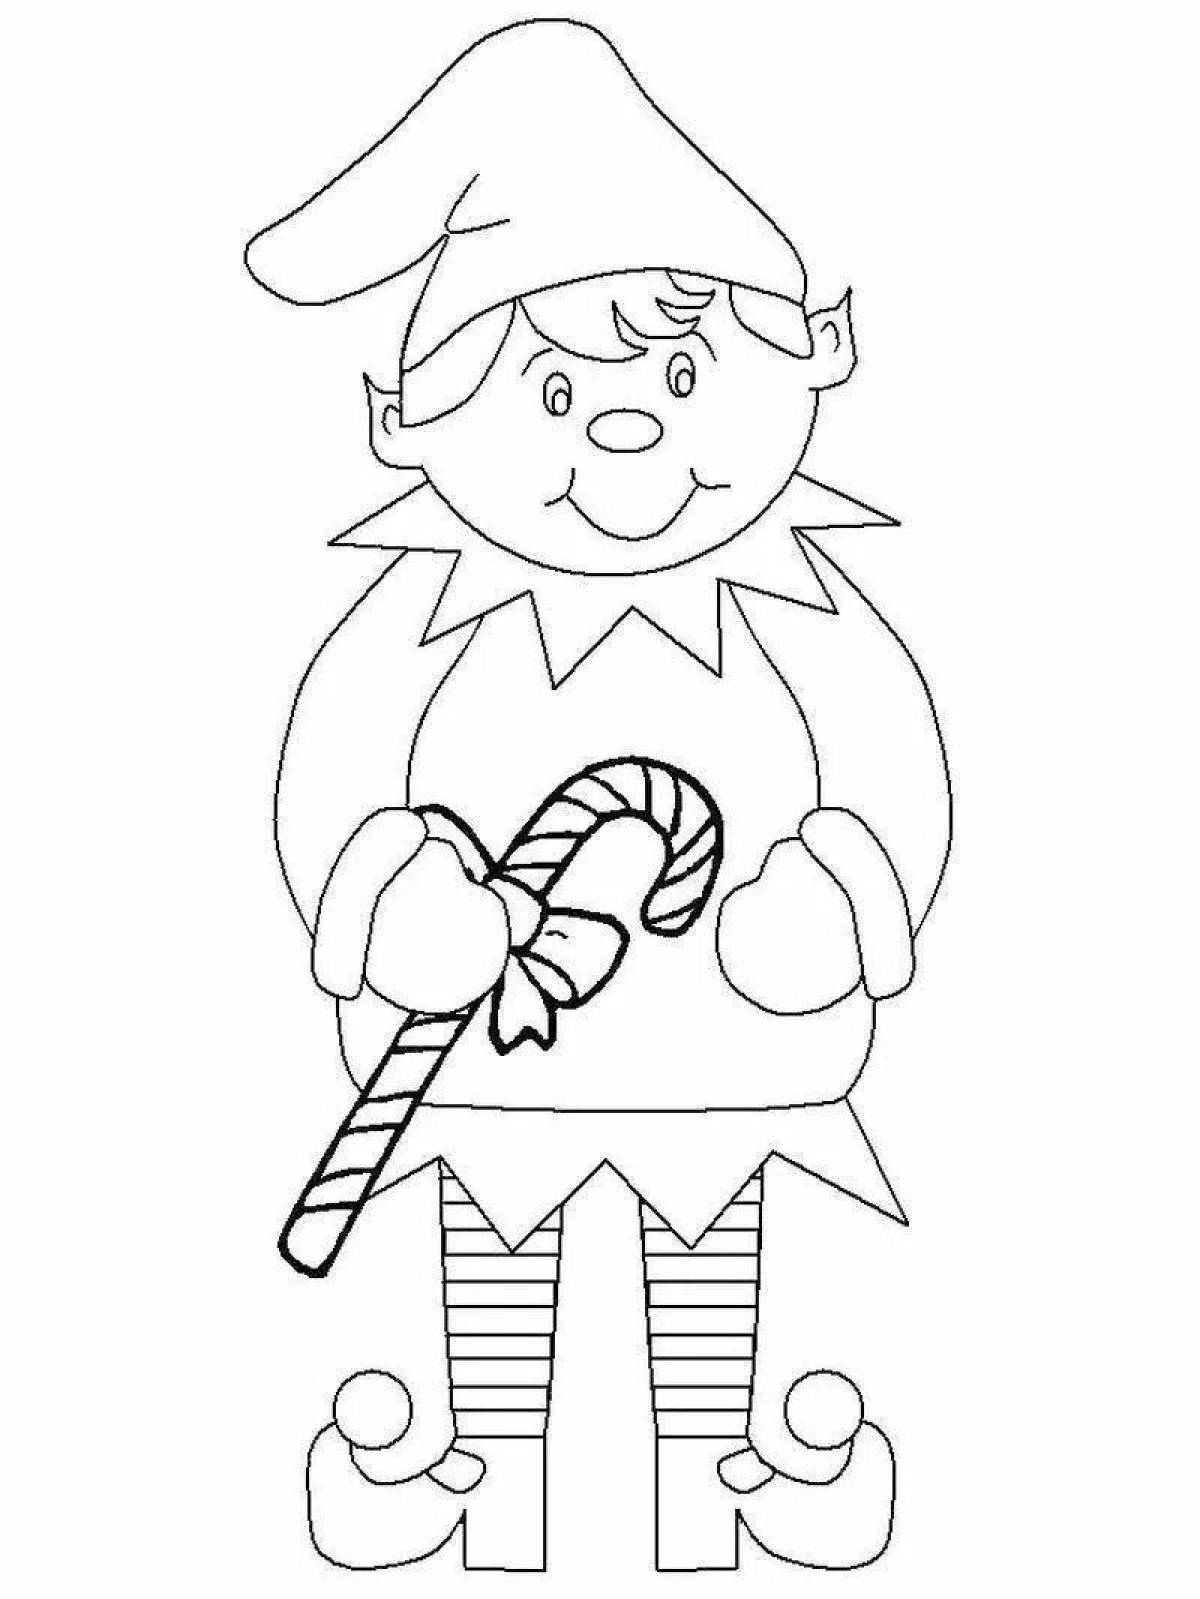 Exciting gnome Christmas coloring book